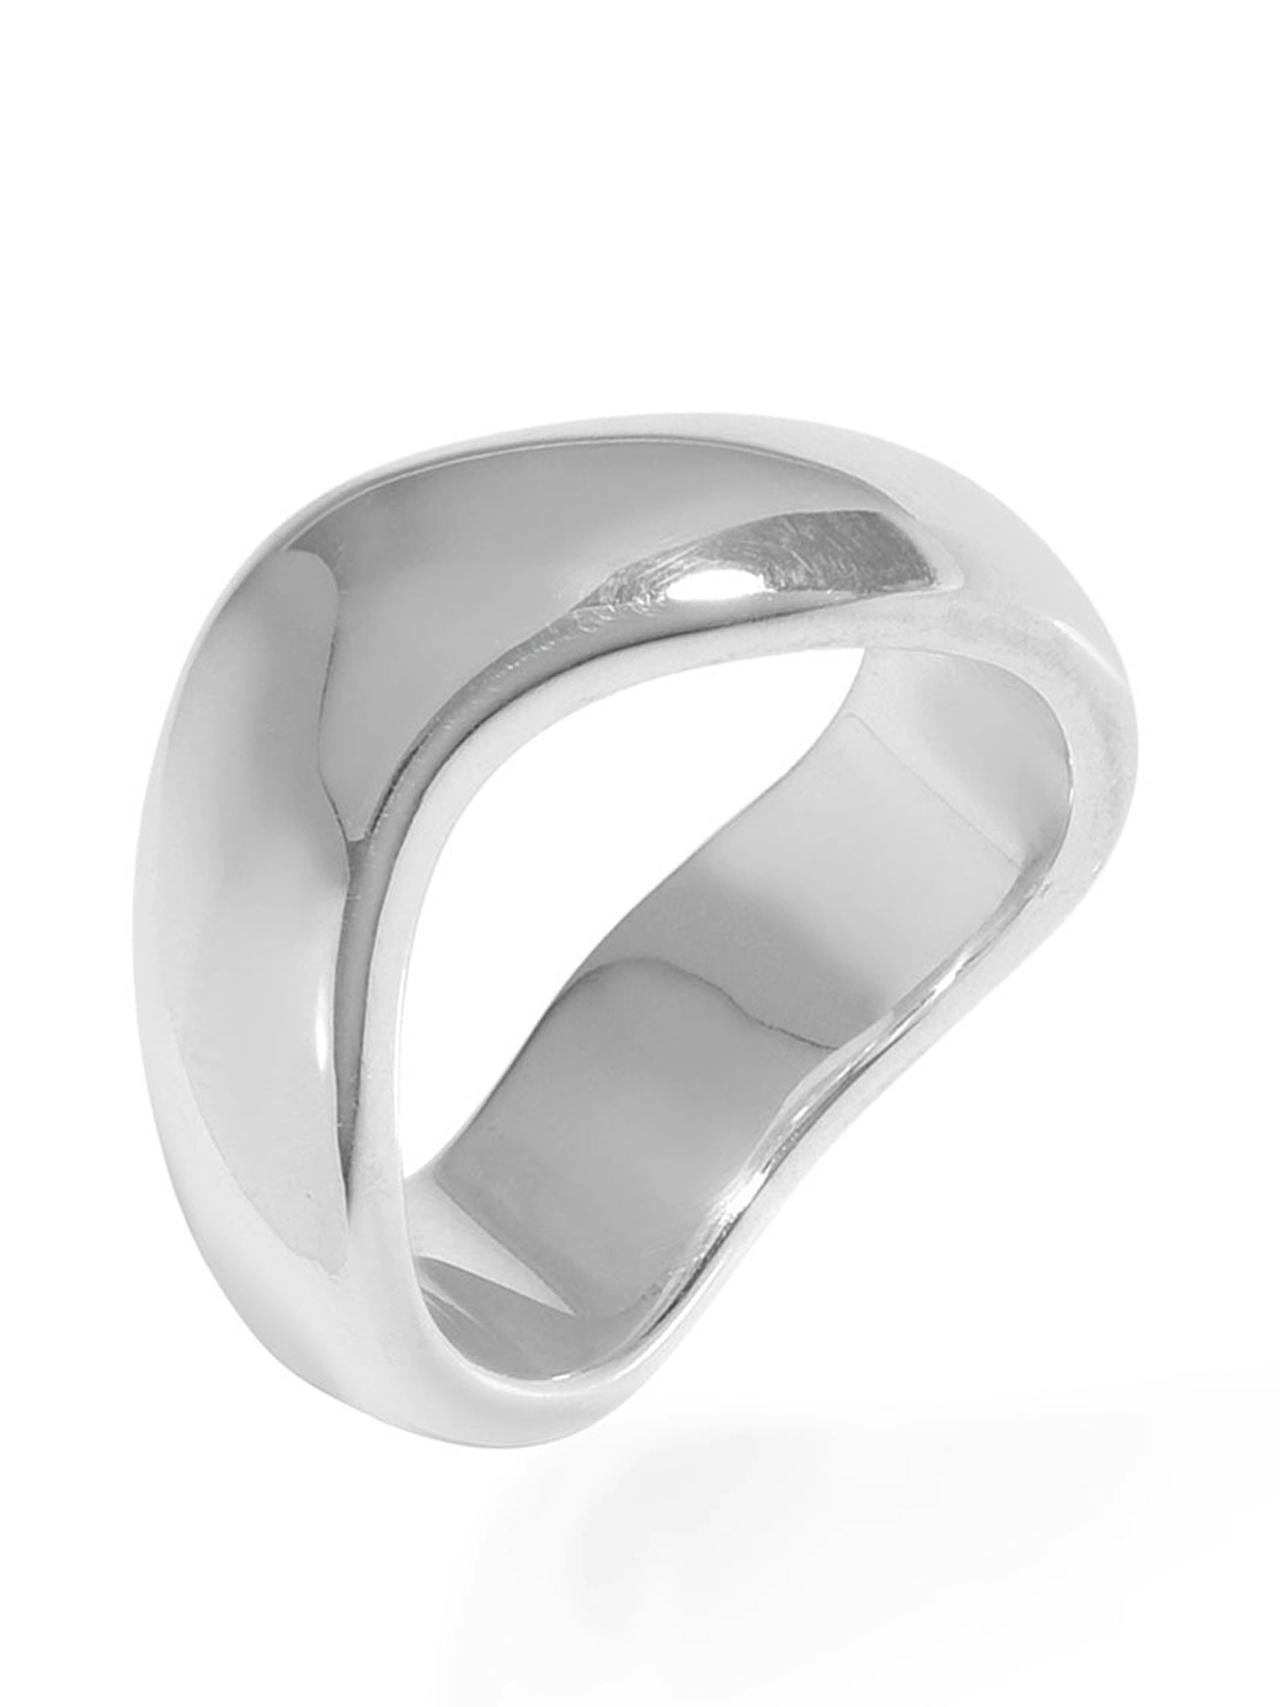 Silver Rocco ring